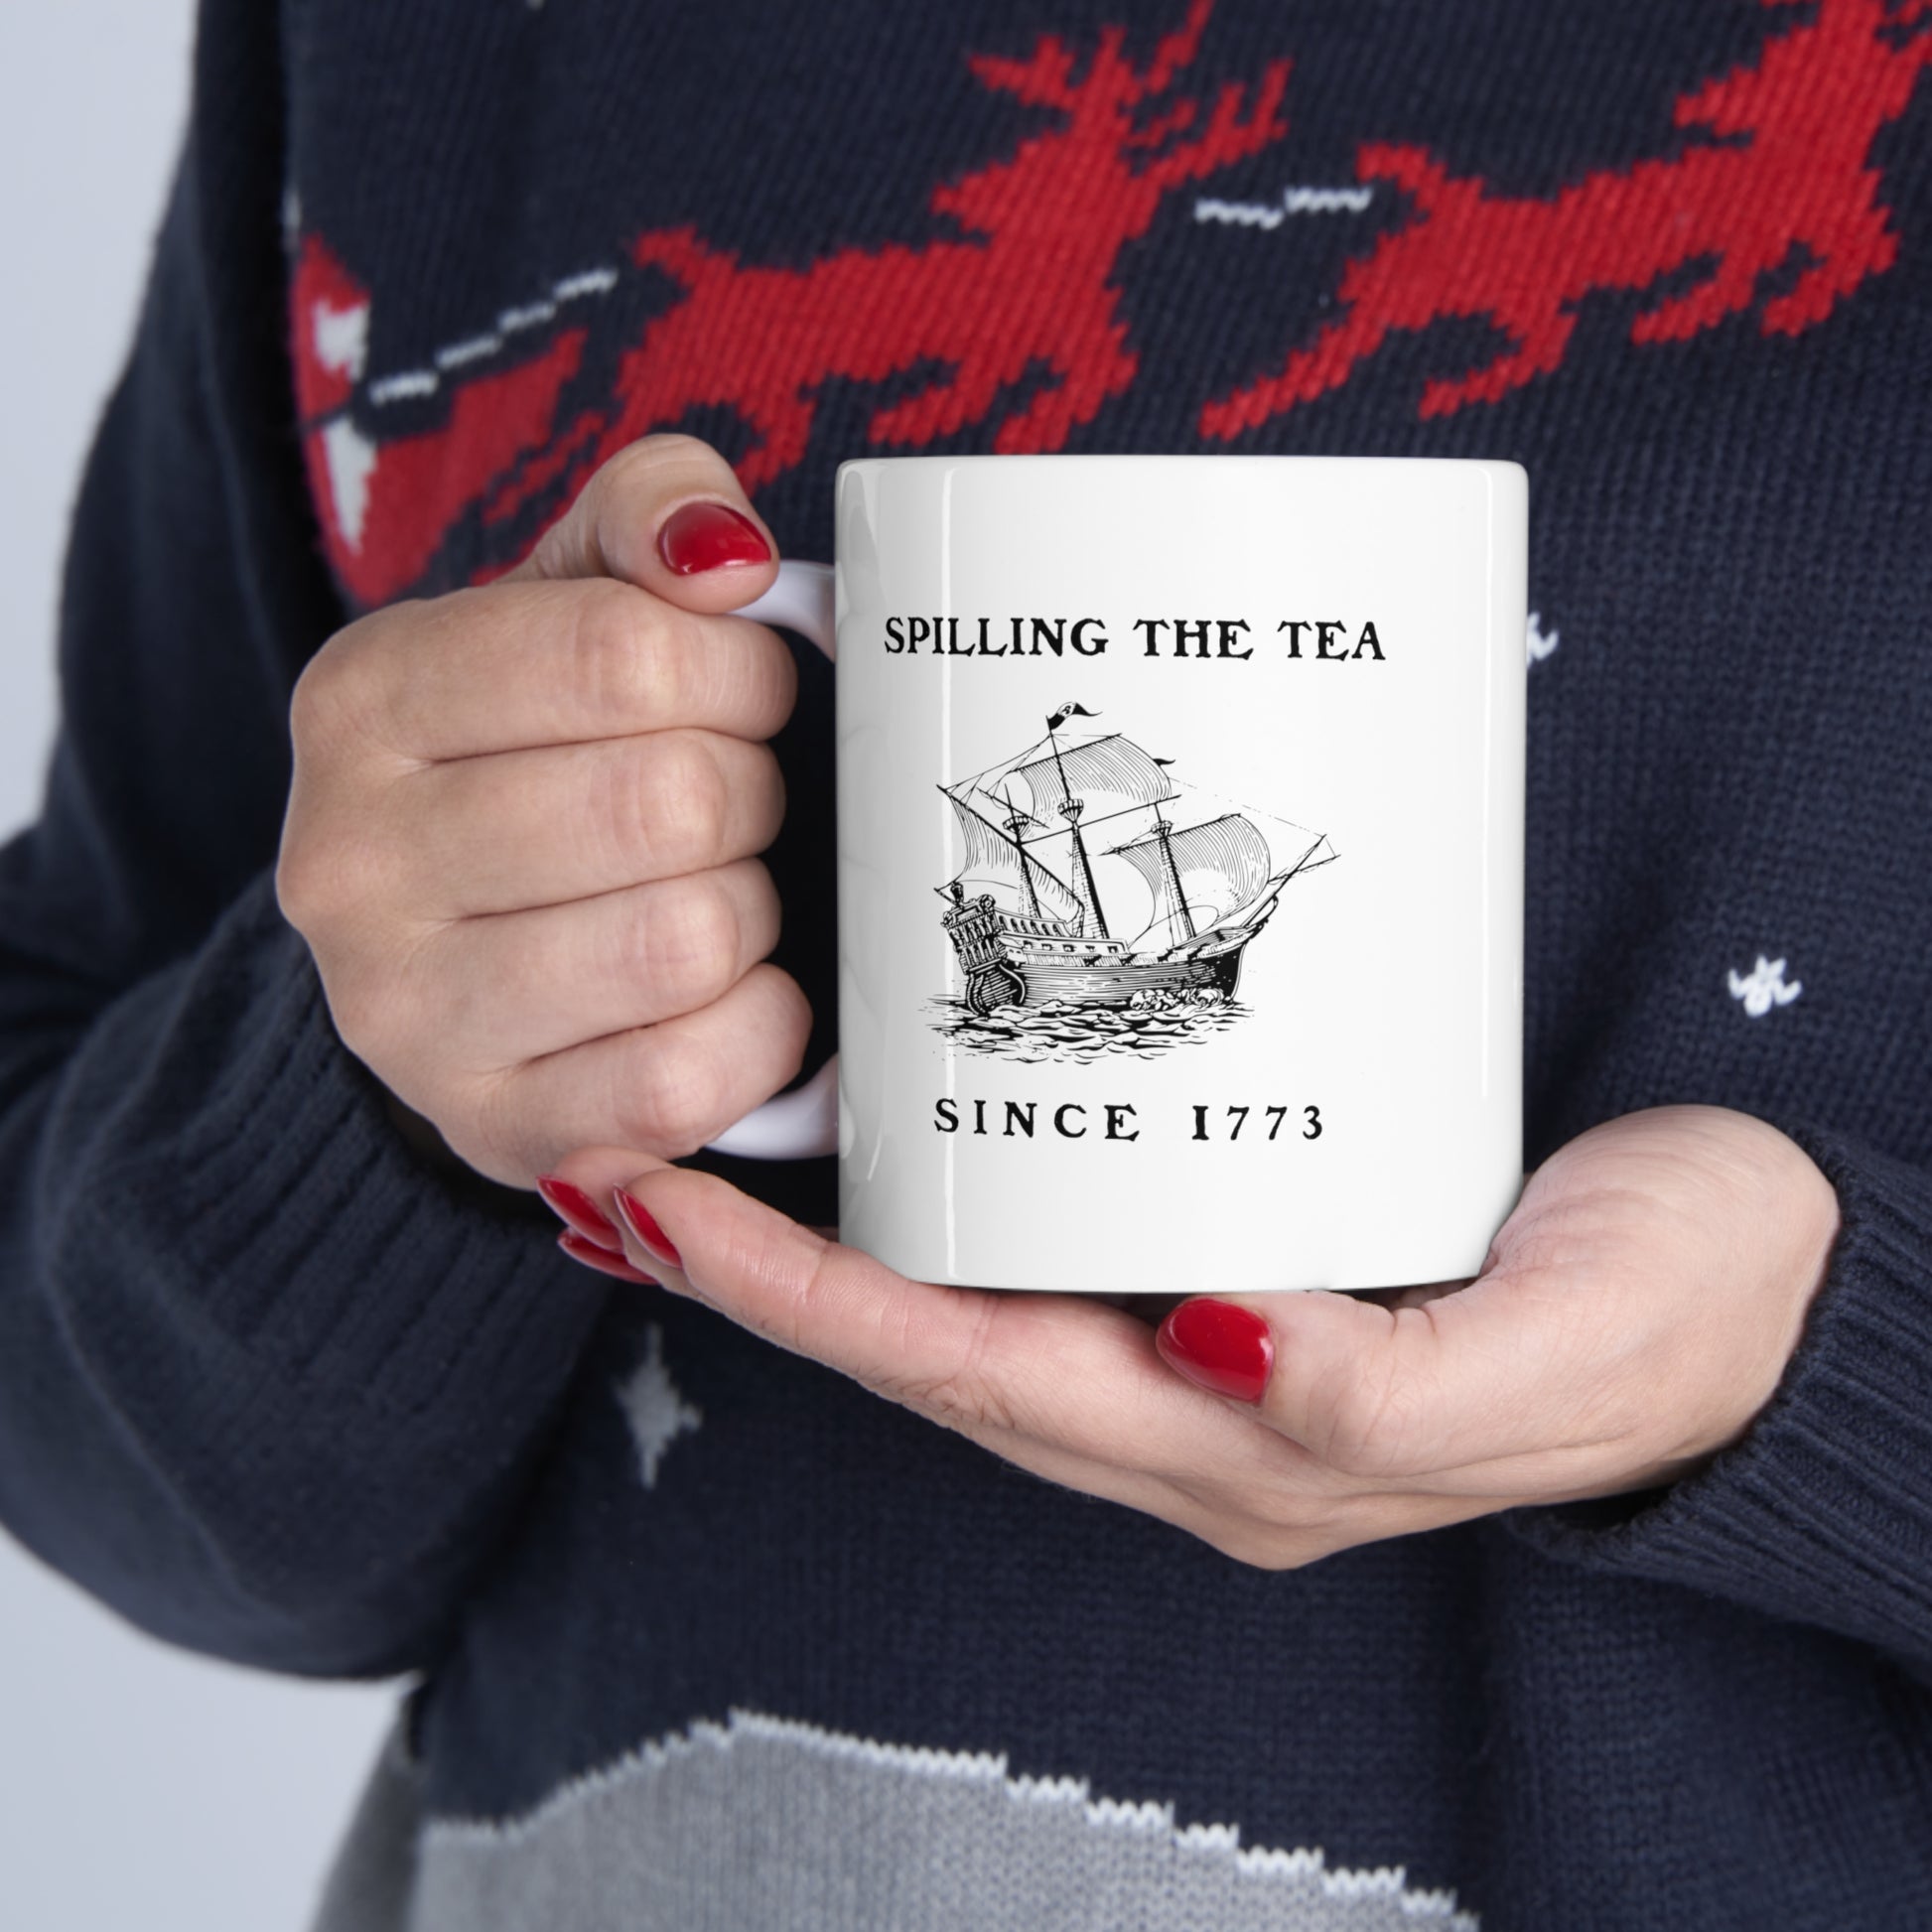 "Spilling The Tea Since 1773" Coffee Mug - Weave Got Gifts - Unique Gifts You Won’t Find Anywhere Else!